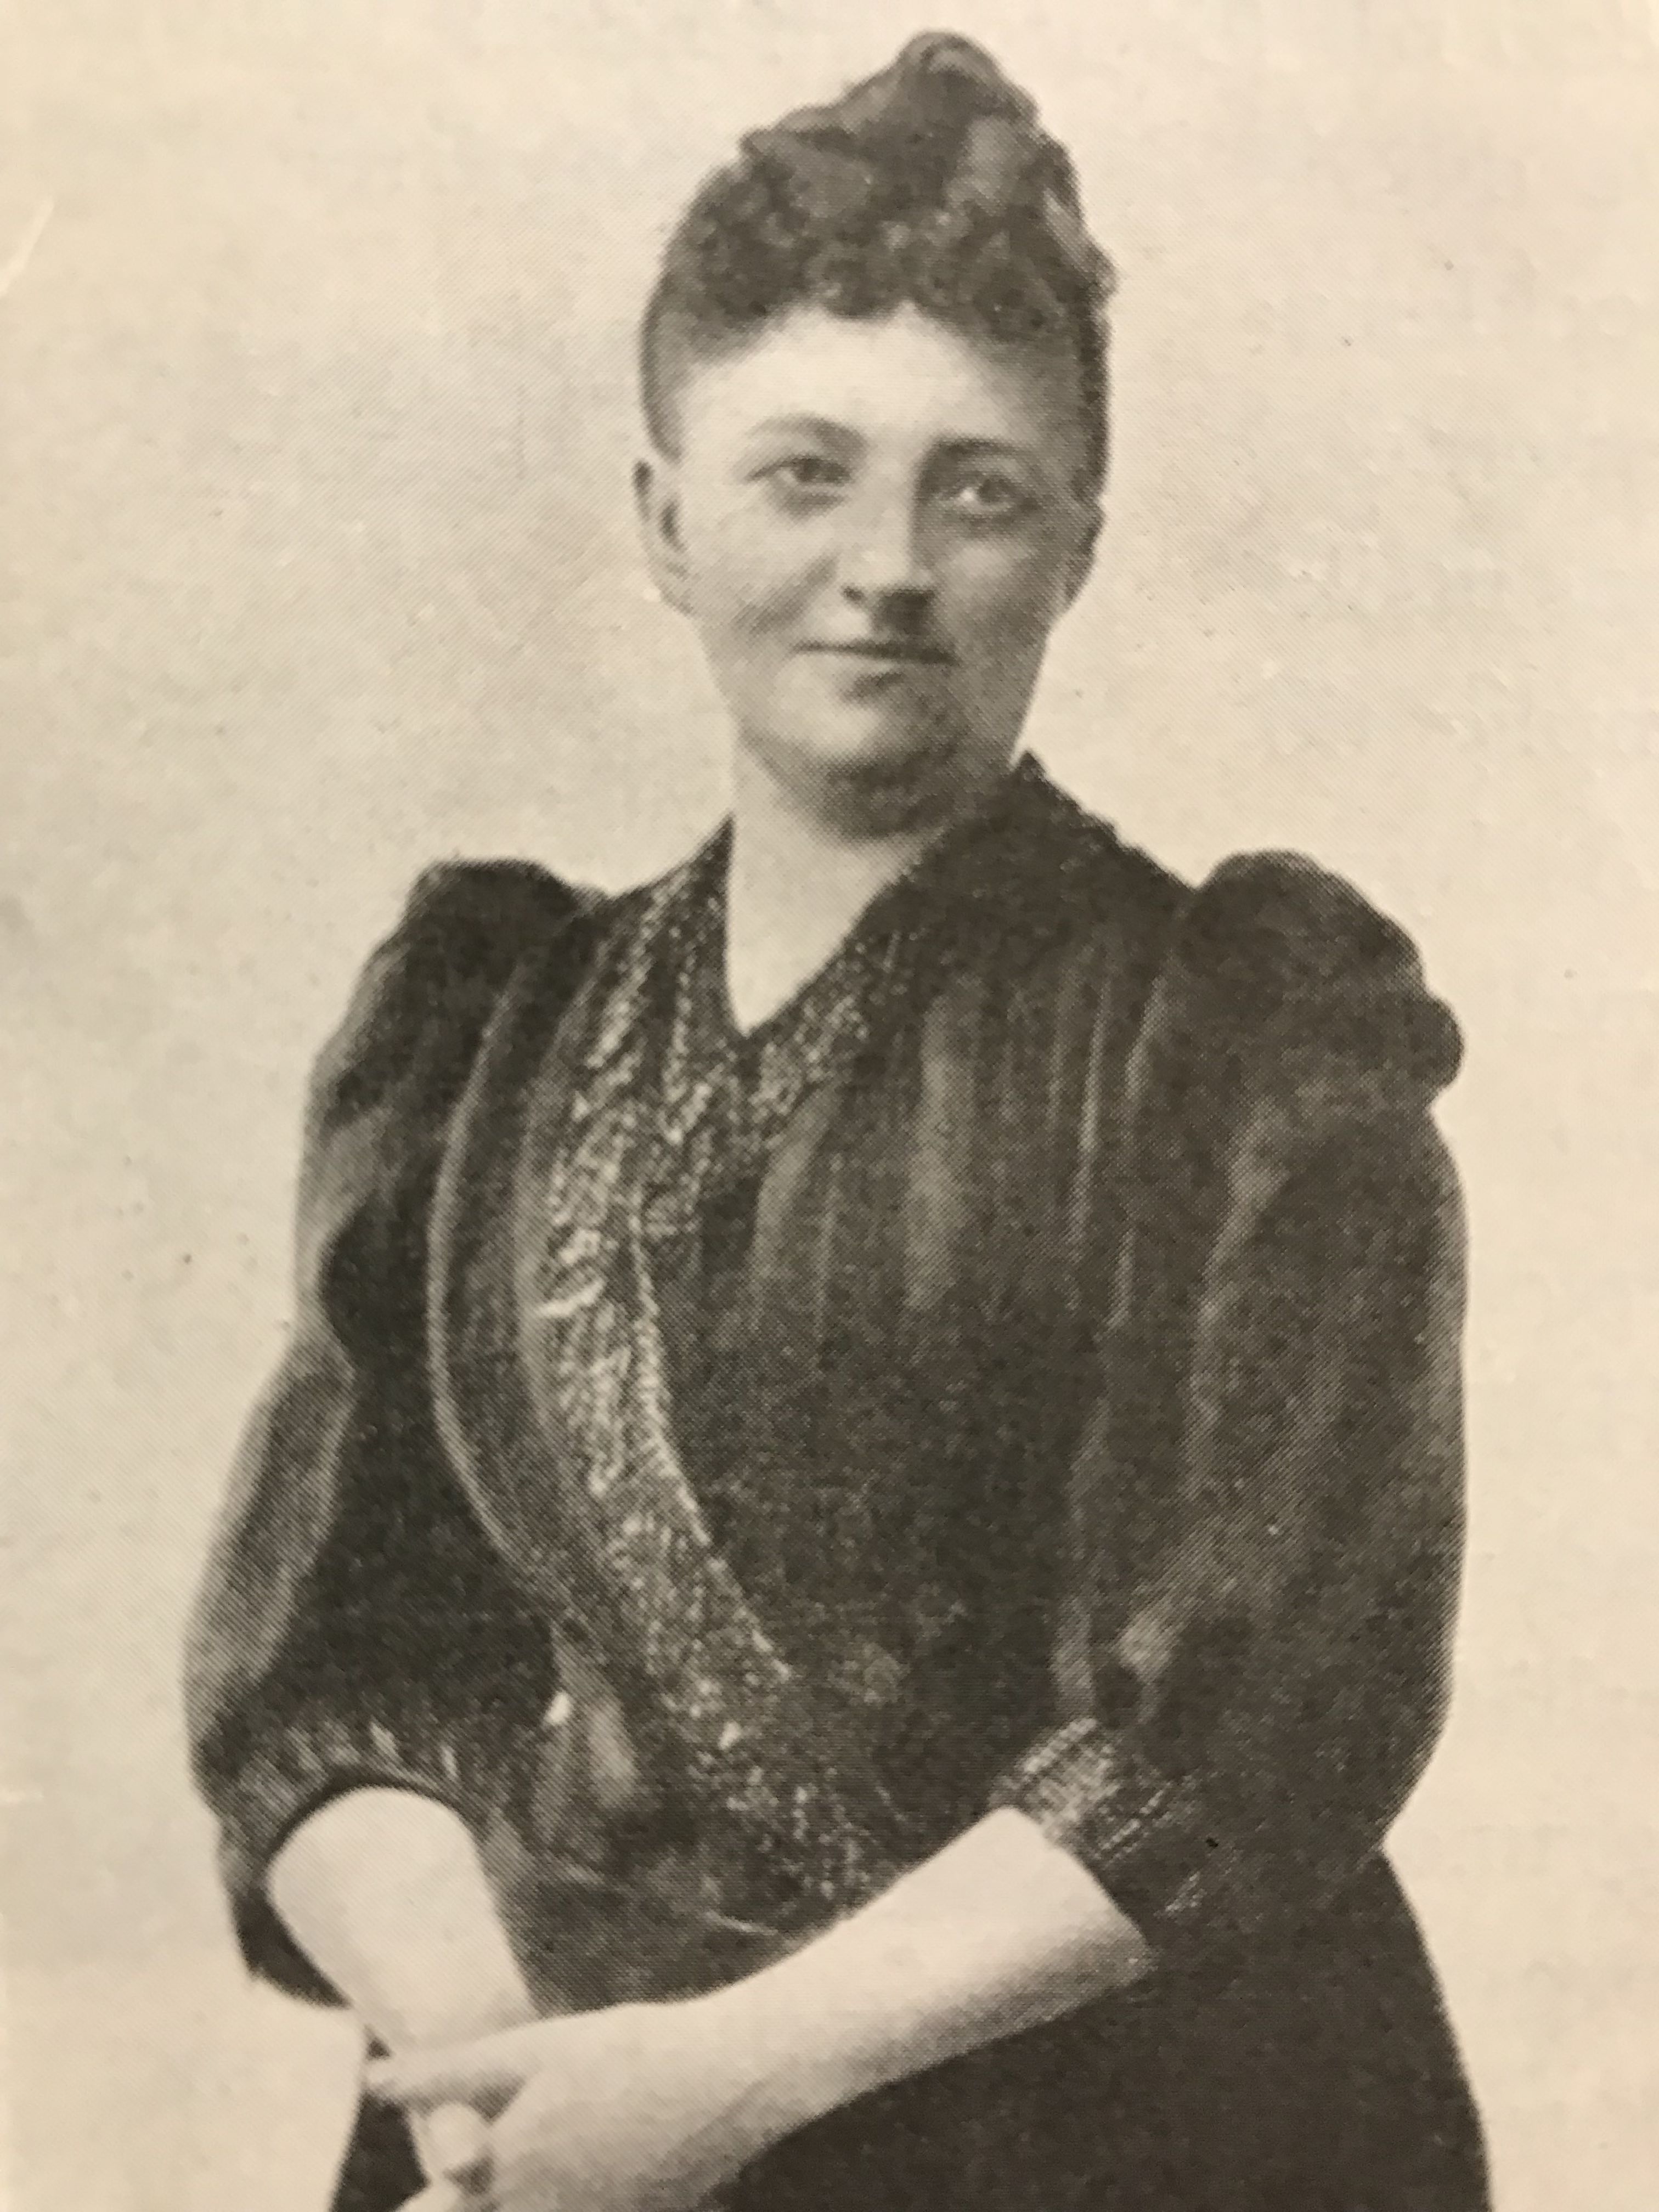 Hilda Thegerström. Photographer and year unknown. Image source: Wikimedia Commons (ViktorWestergren76, CC-BY-SA 4.0)